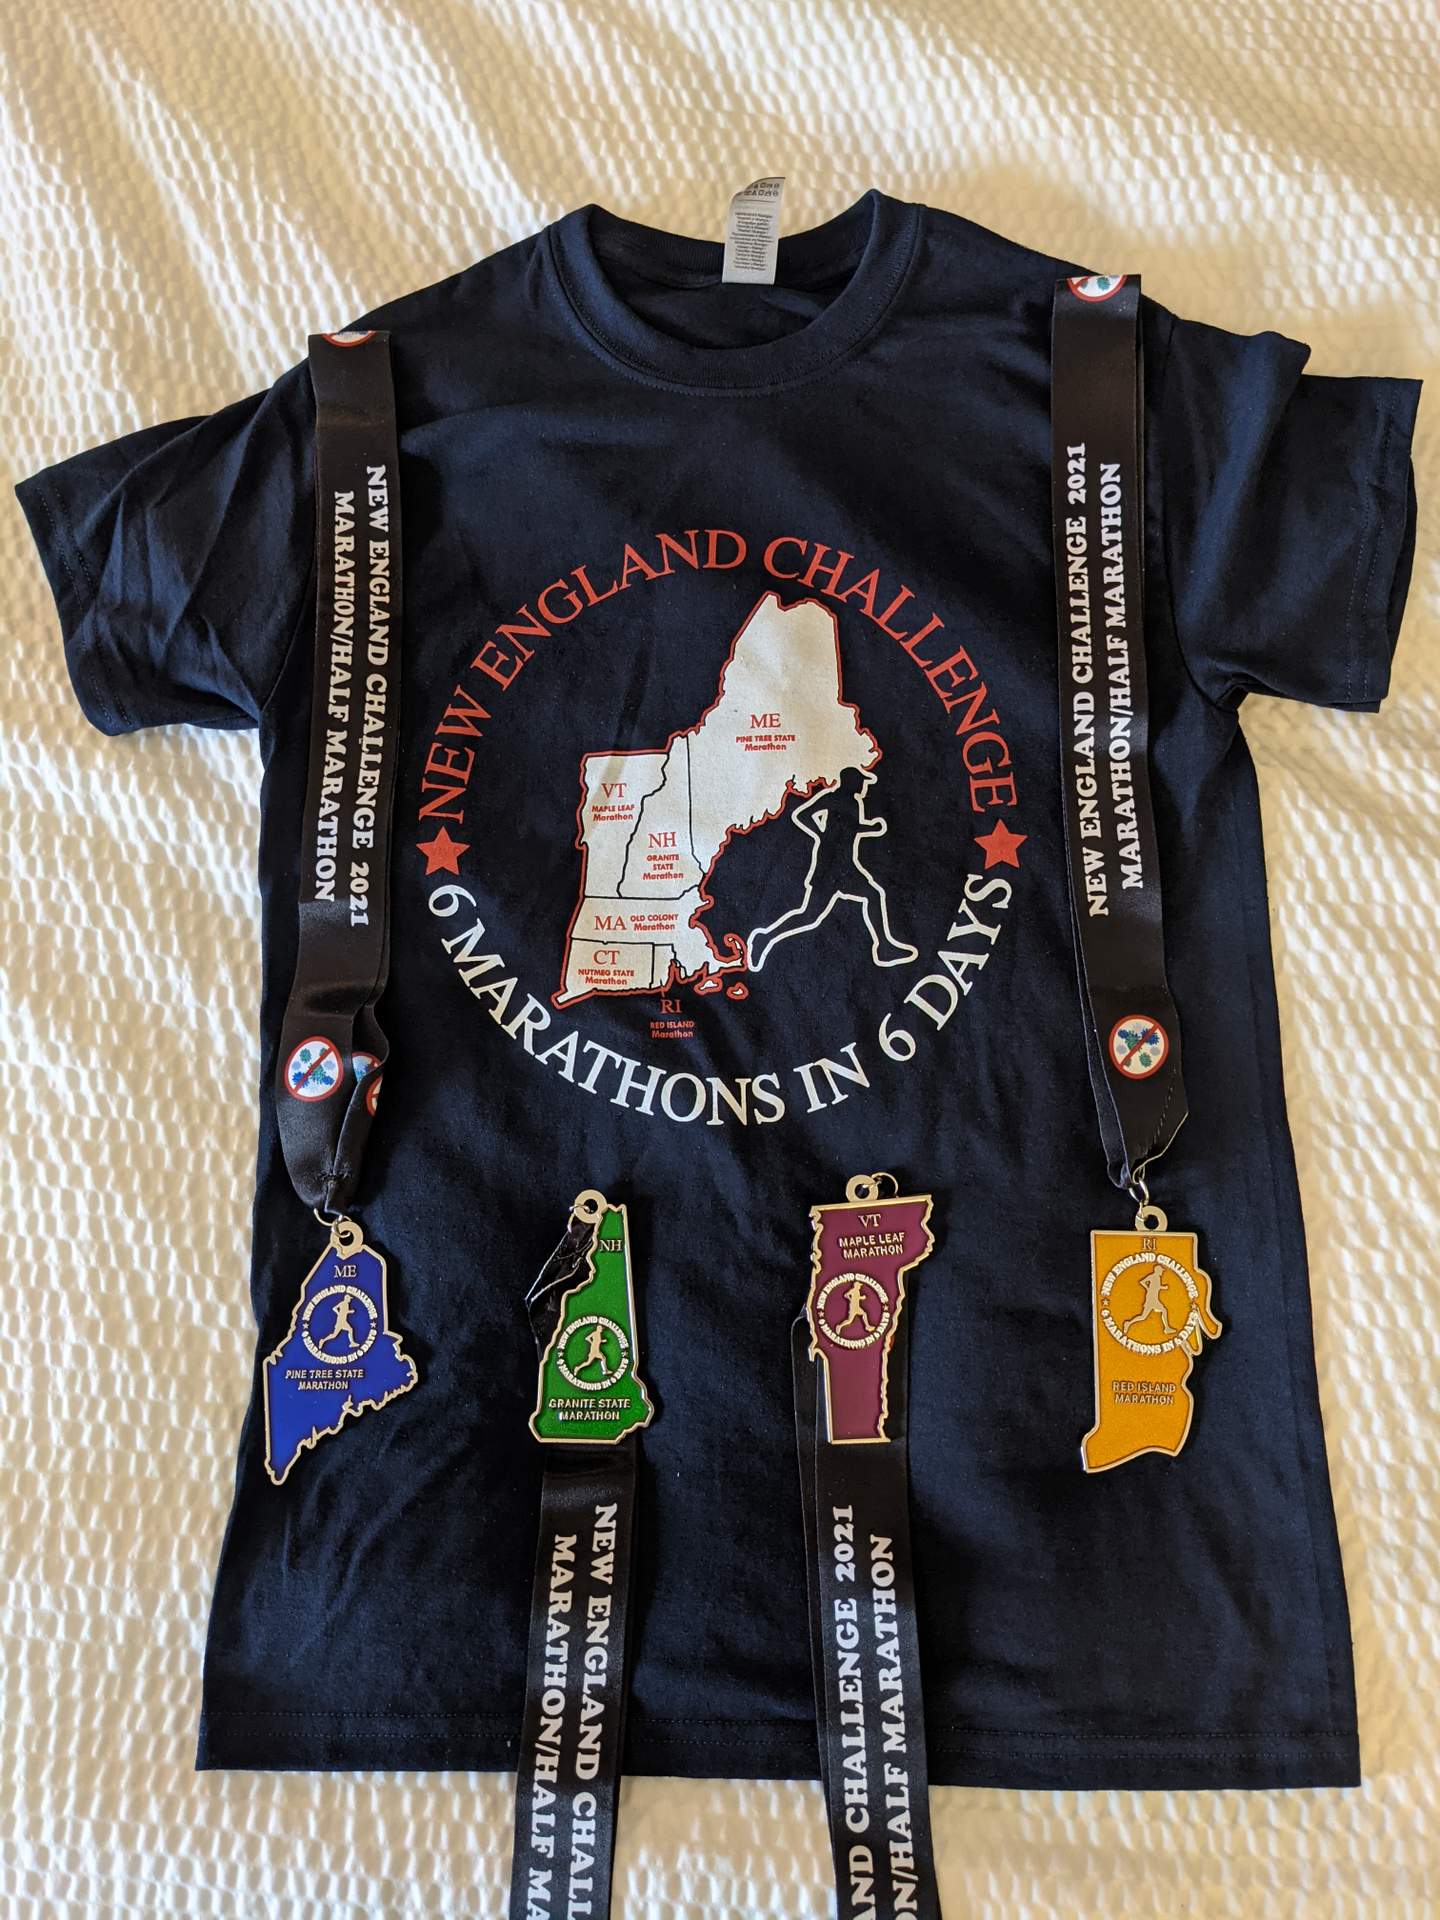 2021 New England Challenge t-shirt with four medals in front